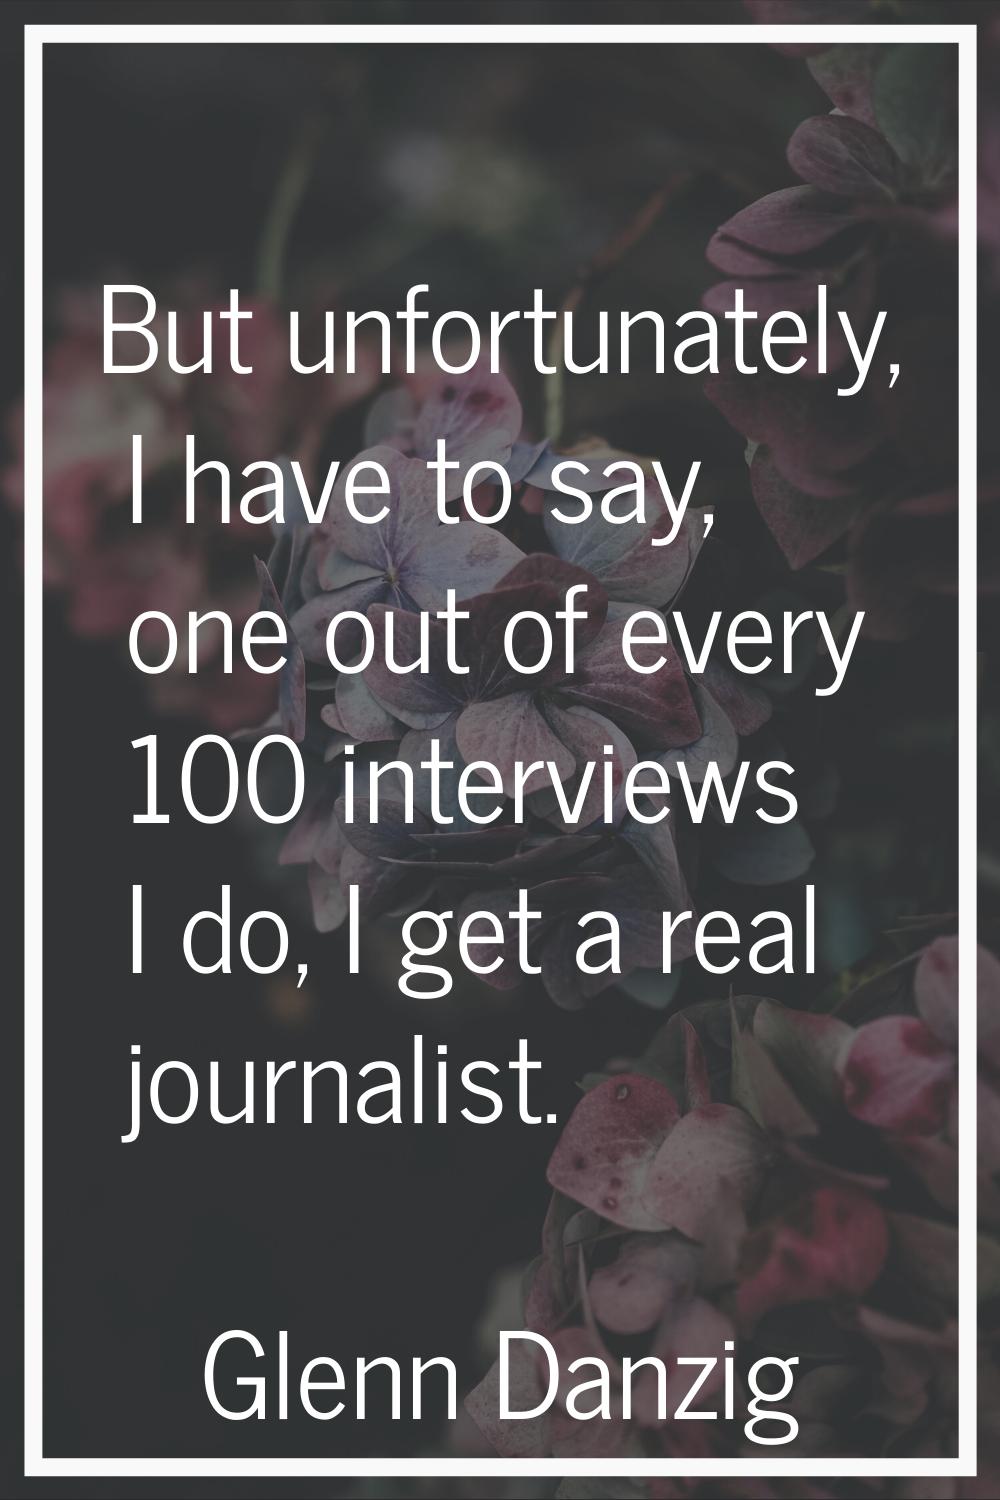 But unfortunately, I have to say, one out of every 100 interviews I do, I get a real journalist.